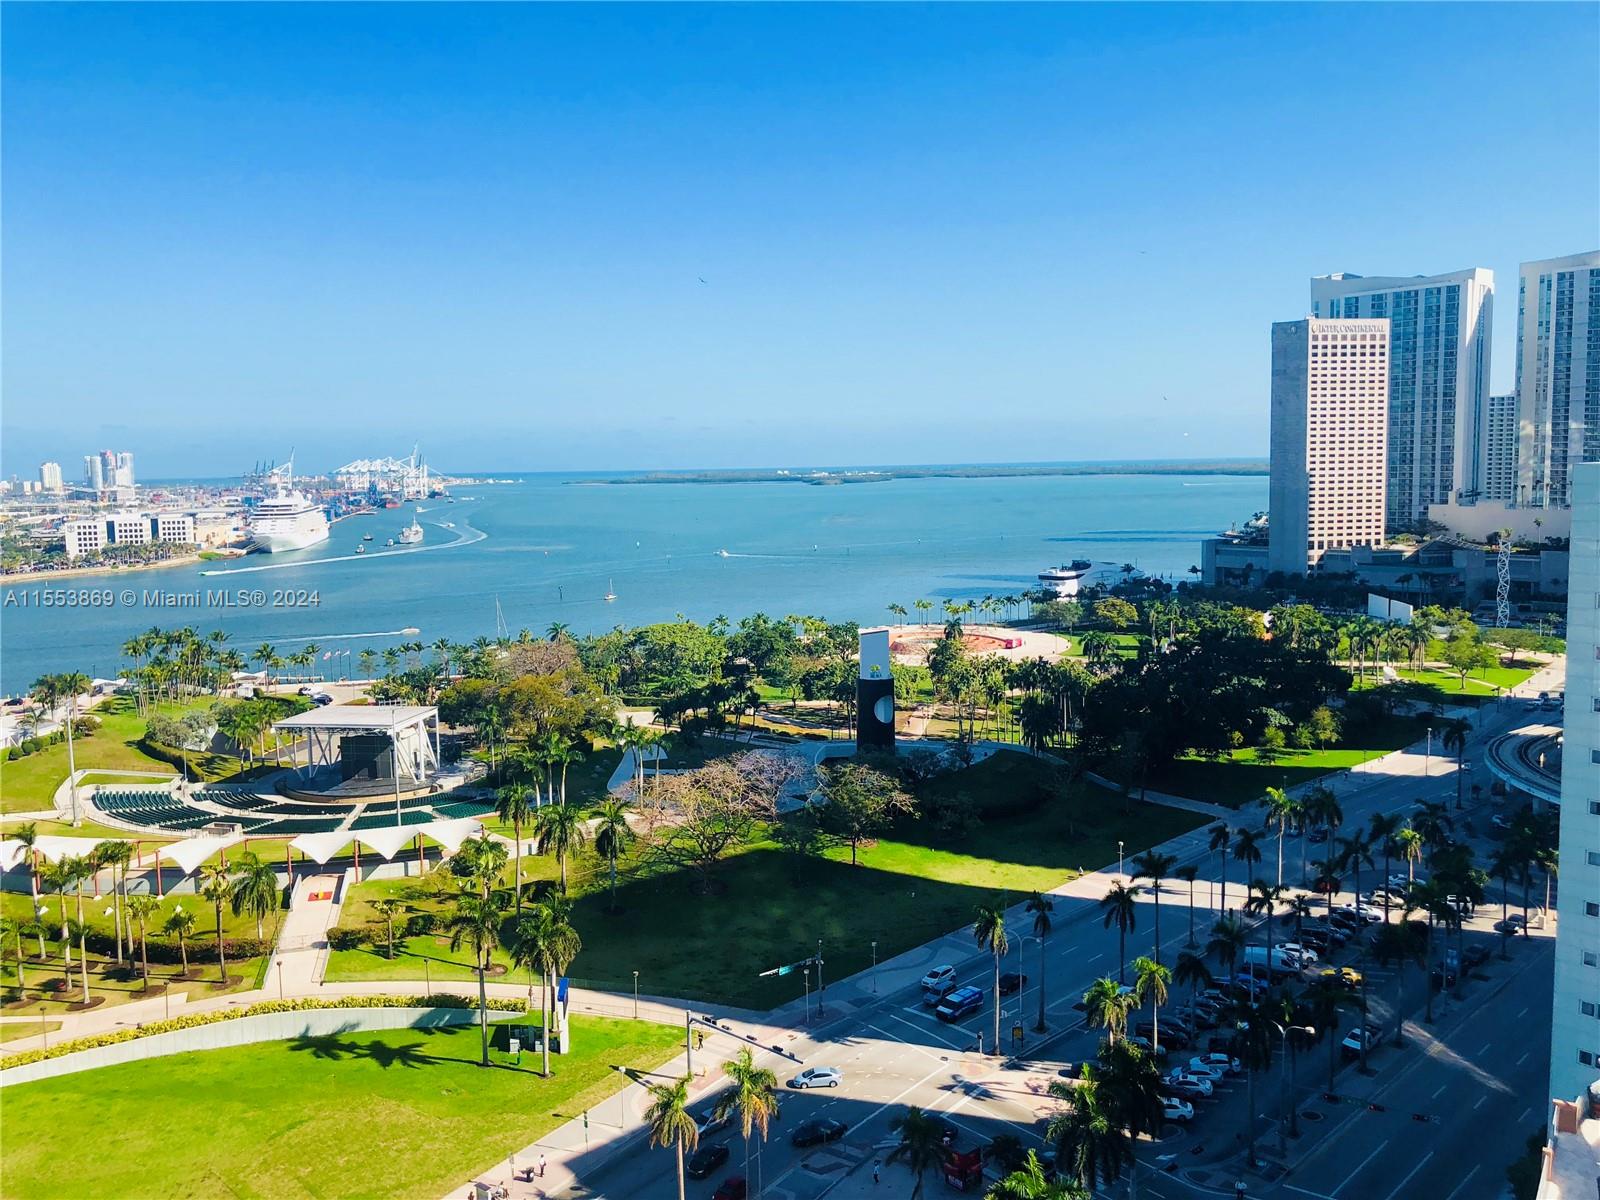 Gorgeous apartment in the heart of Downtown Miami. 2/2.5 + DEN. Across from BaySide & Kaseya Center. This apartment features S/S appliances, granite countertop, wood floors and marble floors. Bay and city view. Steps from stores, restaurants, Miami Beach and Brickell City Centre. One extra room that can be used as a there bedroom. Professionally decorated for the well know Designer Julissa De Los Santos. In addition, this building is full of amenities. 4 pools, gym, spa, movie theatre, business center, concierge, valet and recreation room. 24 hours concierge.